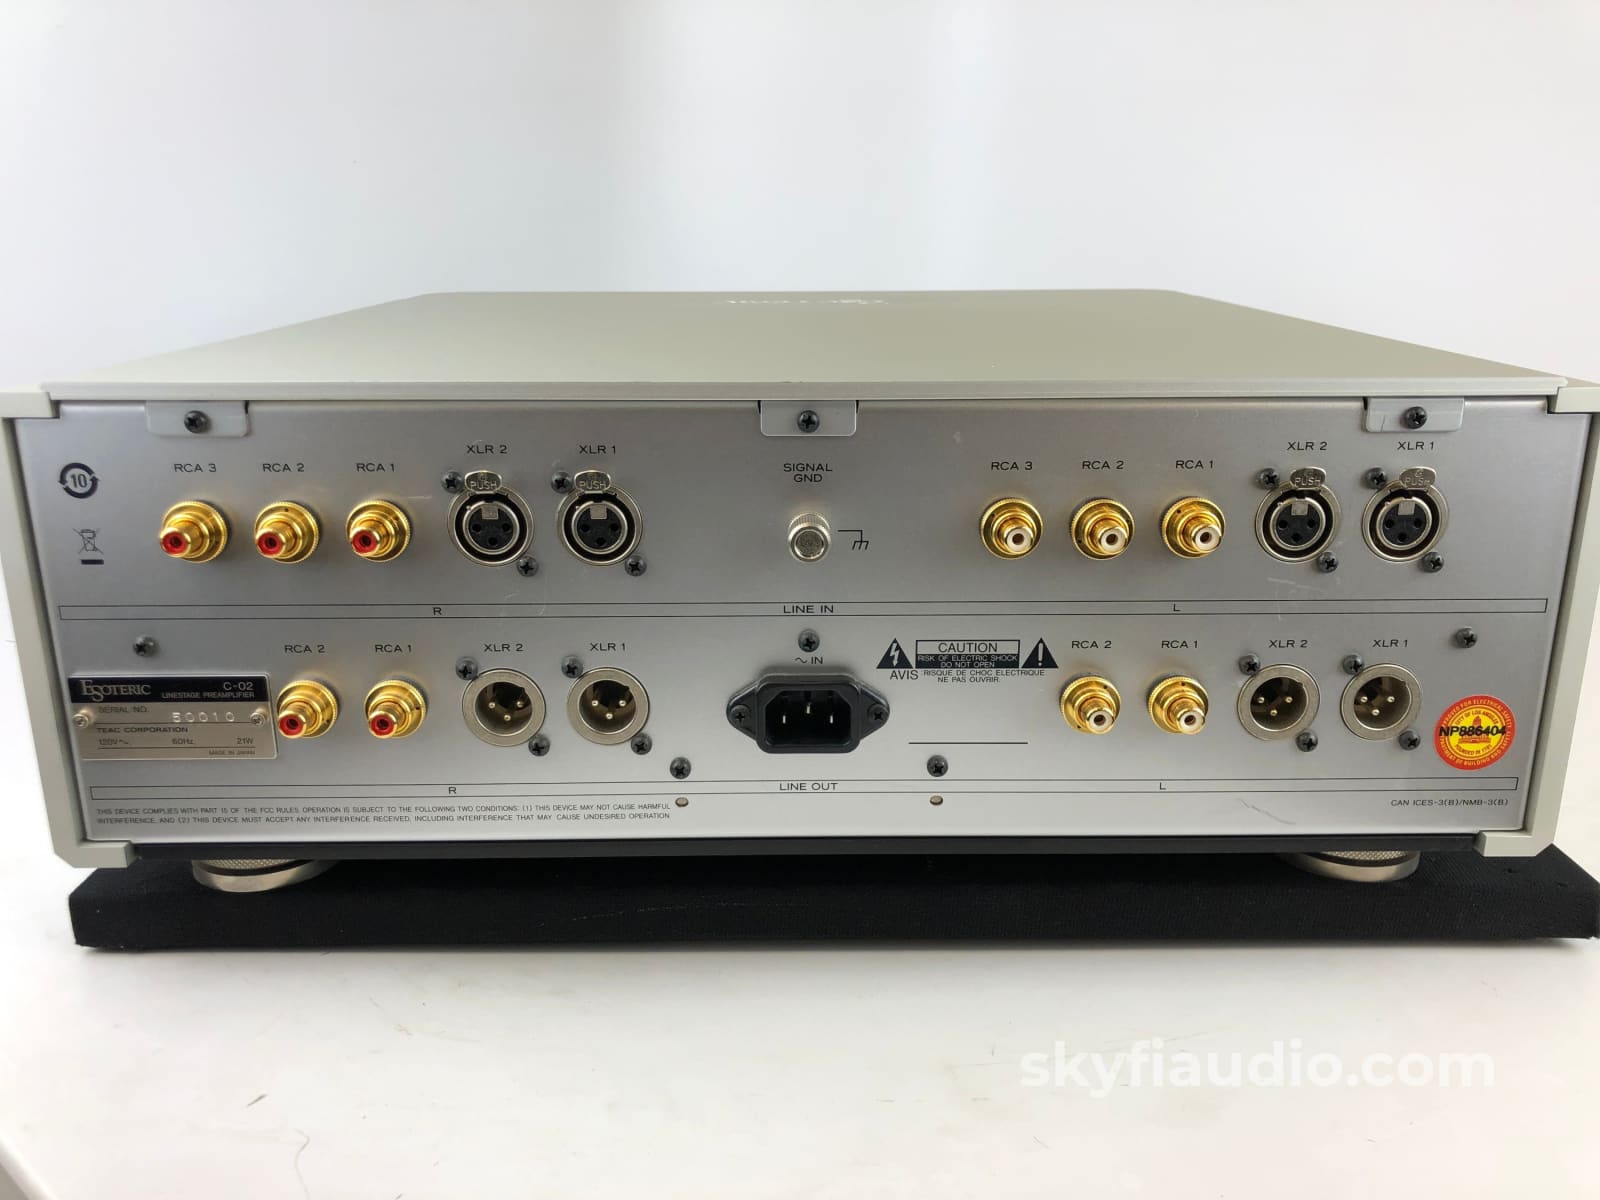 Esoteric C-02 Flagship Preamplifier Complete Set And Mint! $25K Msrp